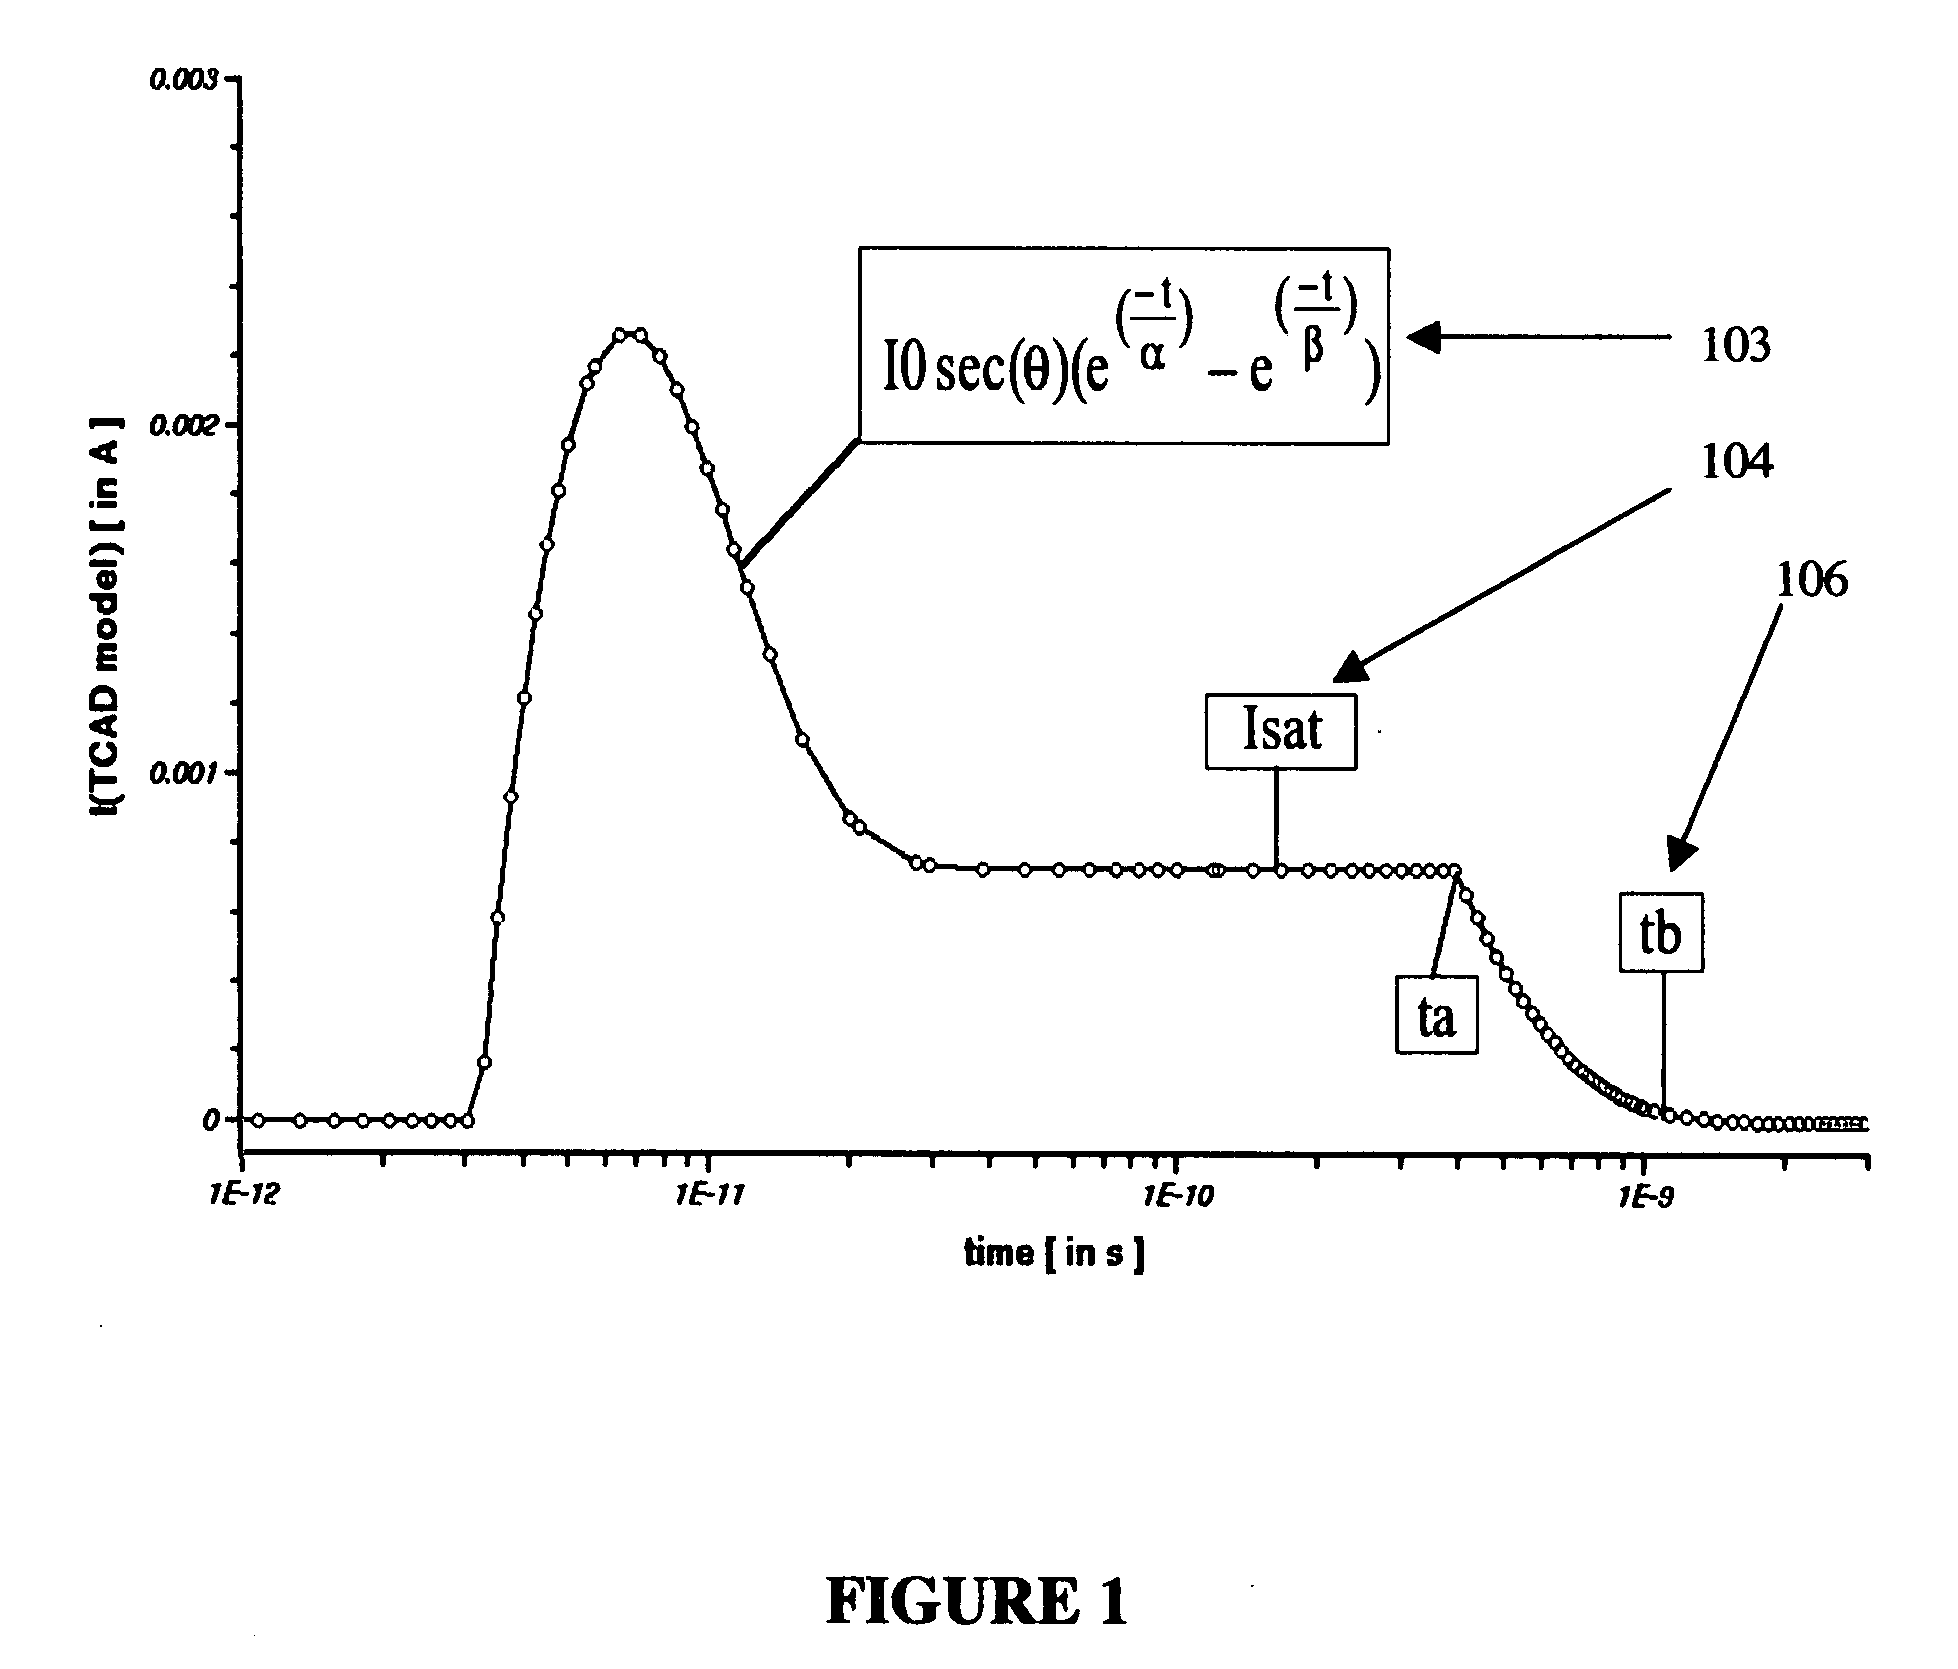 Apparatus and method for the determination of SEU and SET disruptions in a circuit caused by ionizing particle strikes